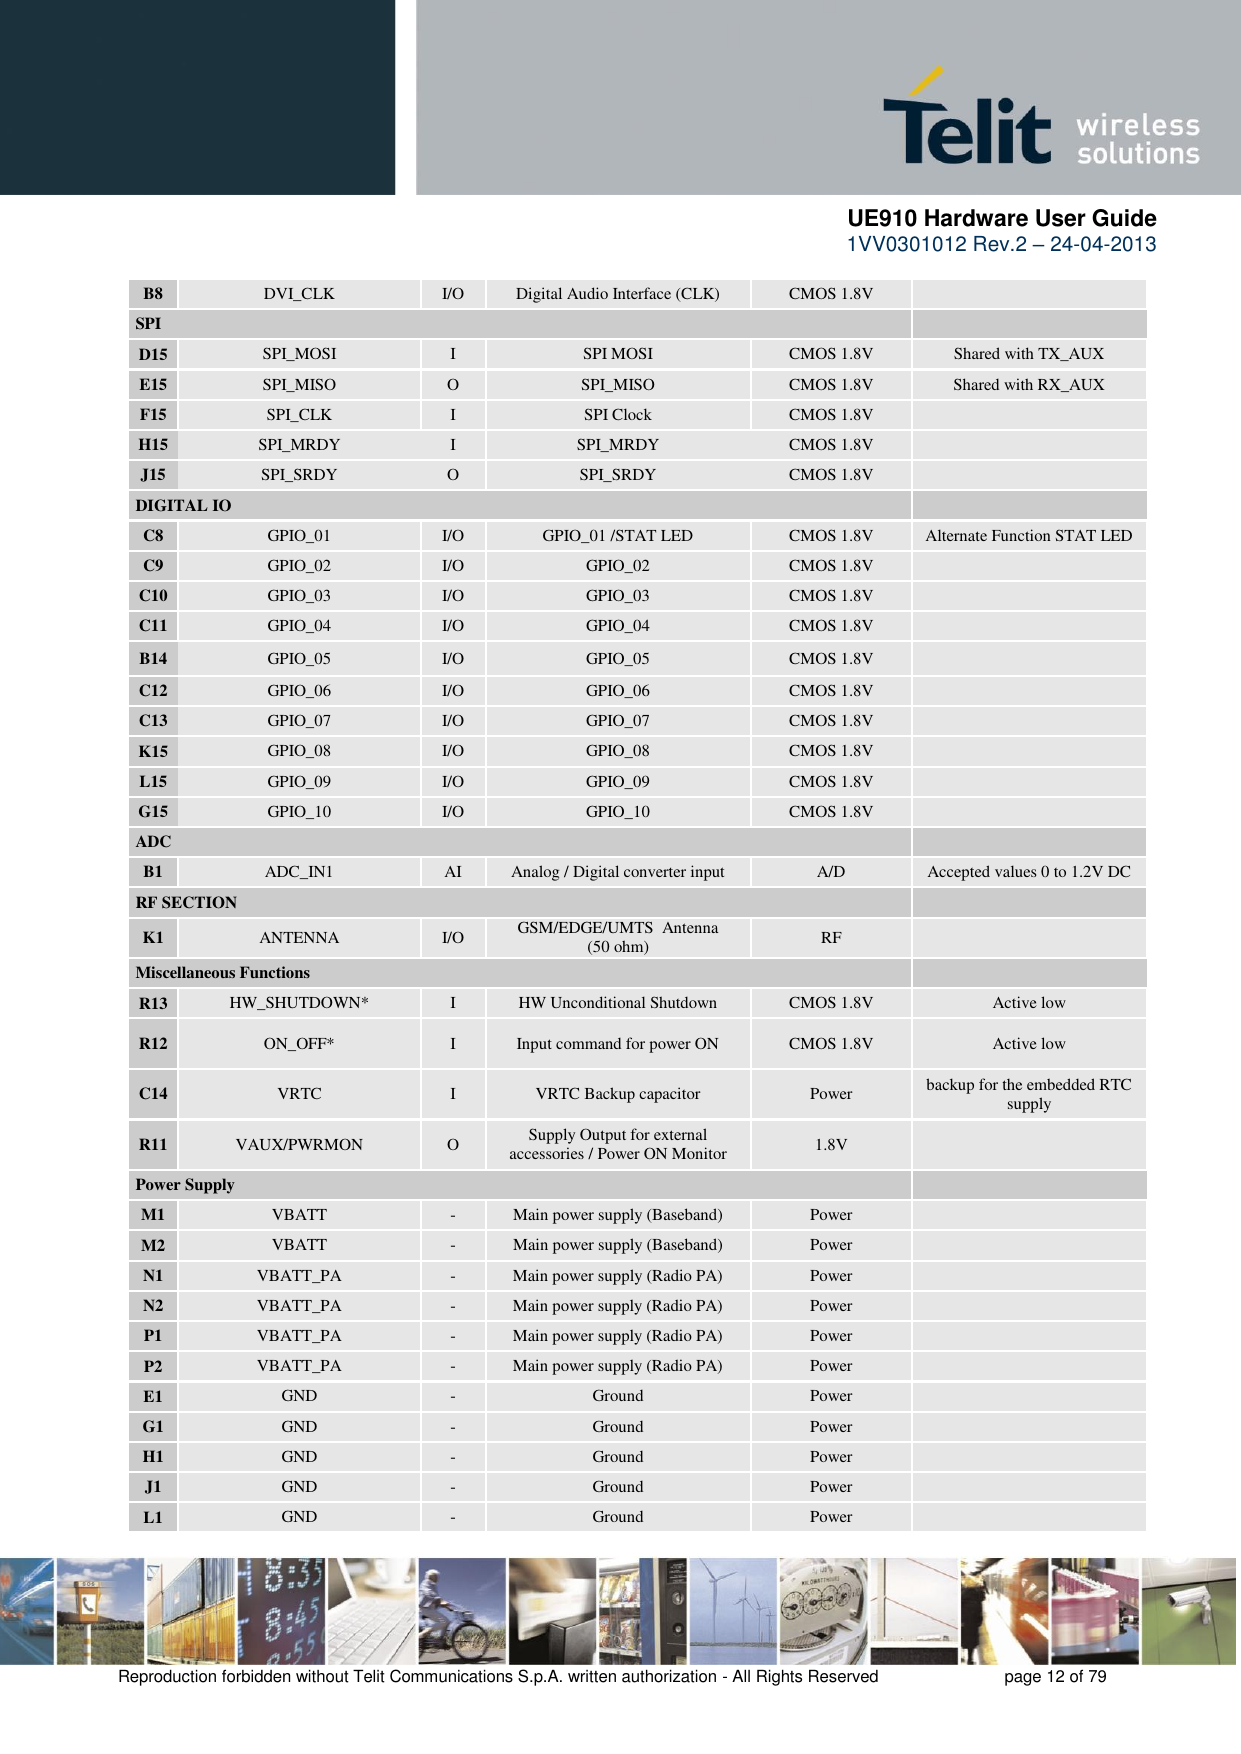      UE910 Hardware User Guide  1VV0301012 Rev.2 – 24-04-2013    Reproduction forbidden without Telit Communications S.p.A. written authorization - All Rights Reserved    page 12 of 79  B8 DVI_CLK I/O Digital Audio Interface (CLK) CMOS 1.8V  SPI      D15 SPI_MOSI I SPI MOSI CMOS 1.8V Shared with TX_AUX E15 SPI_MISO O SPI_MISO CMOS 1.8V Shared with RX_AUX F15 SPI_CLK I SPI Clock CMOS 1.8V  H15 SPI_MRDY I SPI_MRDY CMOS 1.8V  J15 SPI_SRDY O SPI_SRDY CMOS 1.8V   DIGITAL IO     C8 GPIO_01 I/O GPIO_01 /STAT LED CMOS 1.8V Alternate Function STAT LED C9 GPIO_02 I/O GPIO_02 CMOS 1.8V  C10 GPIO_03 I/O GPIO_03  CMOS 1.8V  C11 GPIO_04 I/O GPIO_04 CMOS 1.8V  B14 GPIO_05 I/O GPIO_05  CMOS 1.8V  C12 GPIO_06 I/O GPIO_06 CMOS 1.8V  C13 GPIO_07 I/O GPIO_07  CMOS 1.8V  K15 GPIO_08 I/O GPIO_08 CMOS 1.8V  L15 GPIO_09 I/O GPIO_09 CMOS 1.8V  G15 GPIO_10 I/O GPIO_10 CMOS 1.8V  ADC     B1 ADC_IN1 AI Analog / Digital converter input A/D Accepted values 0 to 1.2V DC RF SECTION     K1 ANTENNA I/O GSM/EDGE/UMTS  Antenna  (50 ohm) RF  Miscellaneous Functions     R13 HW_SHUTDOWN* I HW Unconditional Shutdown CMOS 1.8V Active low R12 ON_OFF* I Input command for power ON CMOS 1.8V Active low C14 VRTC I VRTC Backup capacitor Power backup for the embedded RTC supply R11 VAUX/PWRMON O Supply Output for external accessories / Power ON Monitor 1.8V  Power Supply     M1 VBATT - Main power supply (Baseband) Power  M2 VBATT - Main power supply (Baseband) Power  N1 VBATT_PA - Main power supply (Radio PA) Power  N2 VBATT_PA - Main power supply (Radio PA) Power  P1 VBATT_PA - Main power supply (Radio PA) Power  P2 VBATT_PA - Main power supply (Radio PA) Power  E1 GND - Ground Power  G1 GND - Ground Power  H1 GND - Ground Power  J1 GND - Ground Power  L1 GND - Ground Power  